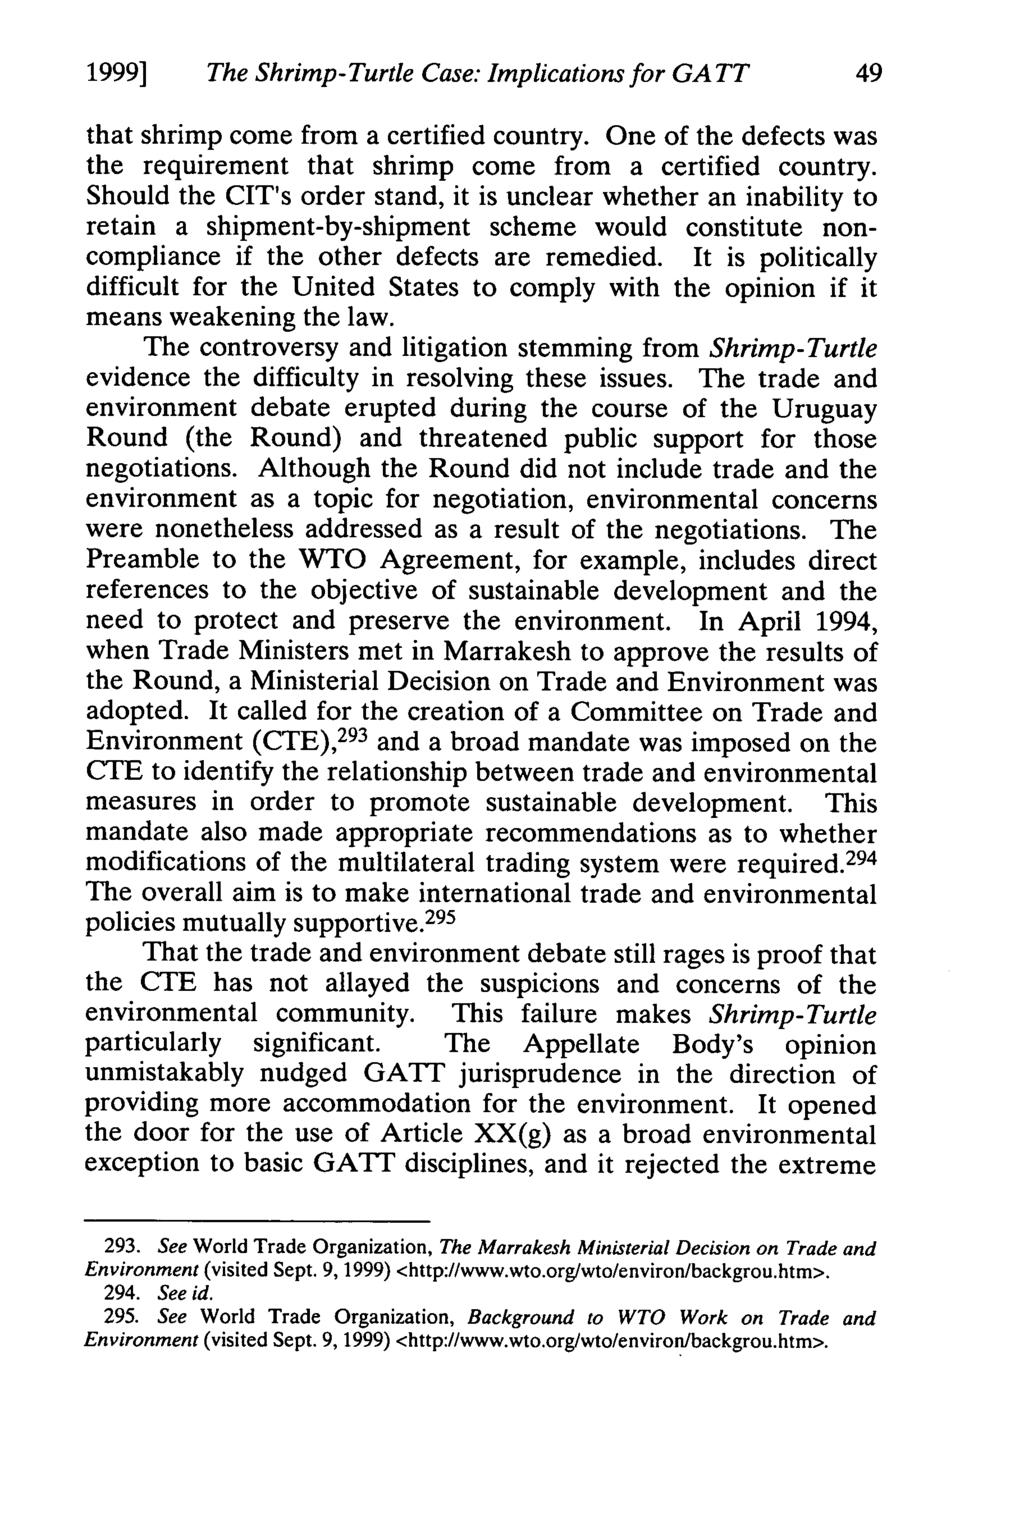 1999] The Shrimp-Turtle Case: Implications for GATT 49 that shrimp come from a certified country. One of the defects was the requirement that shrimp come from a certified country.